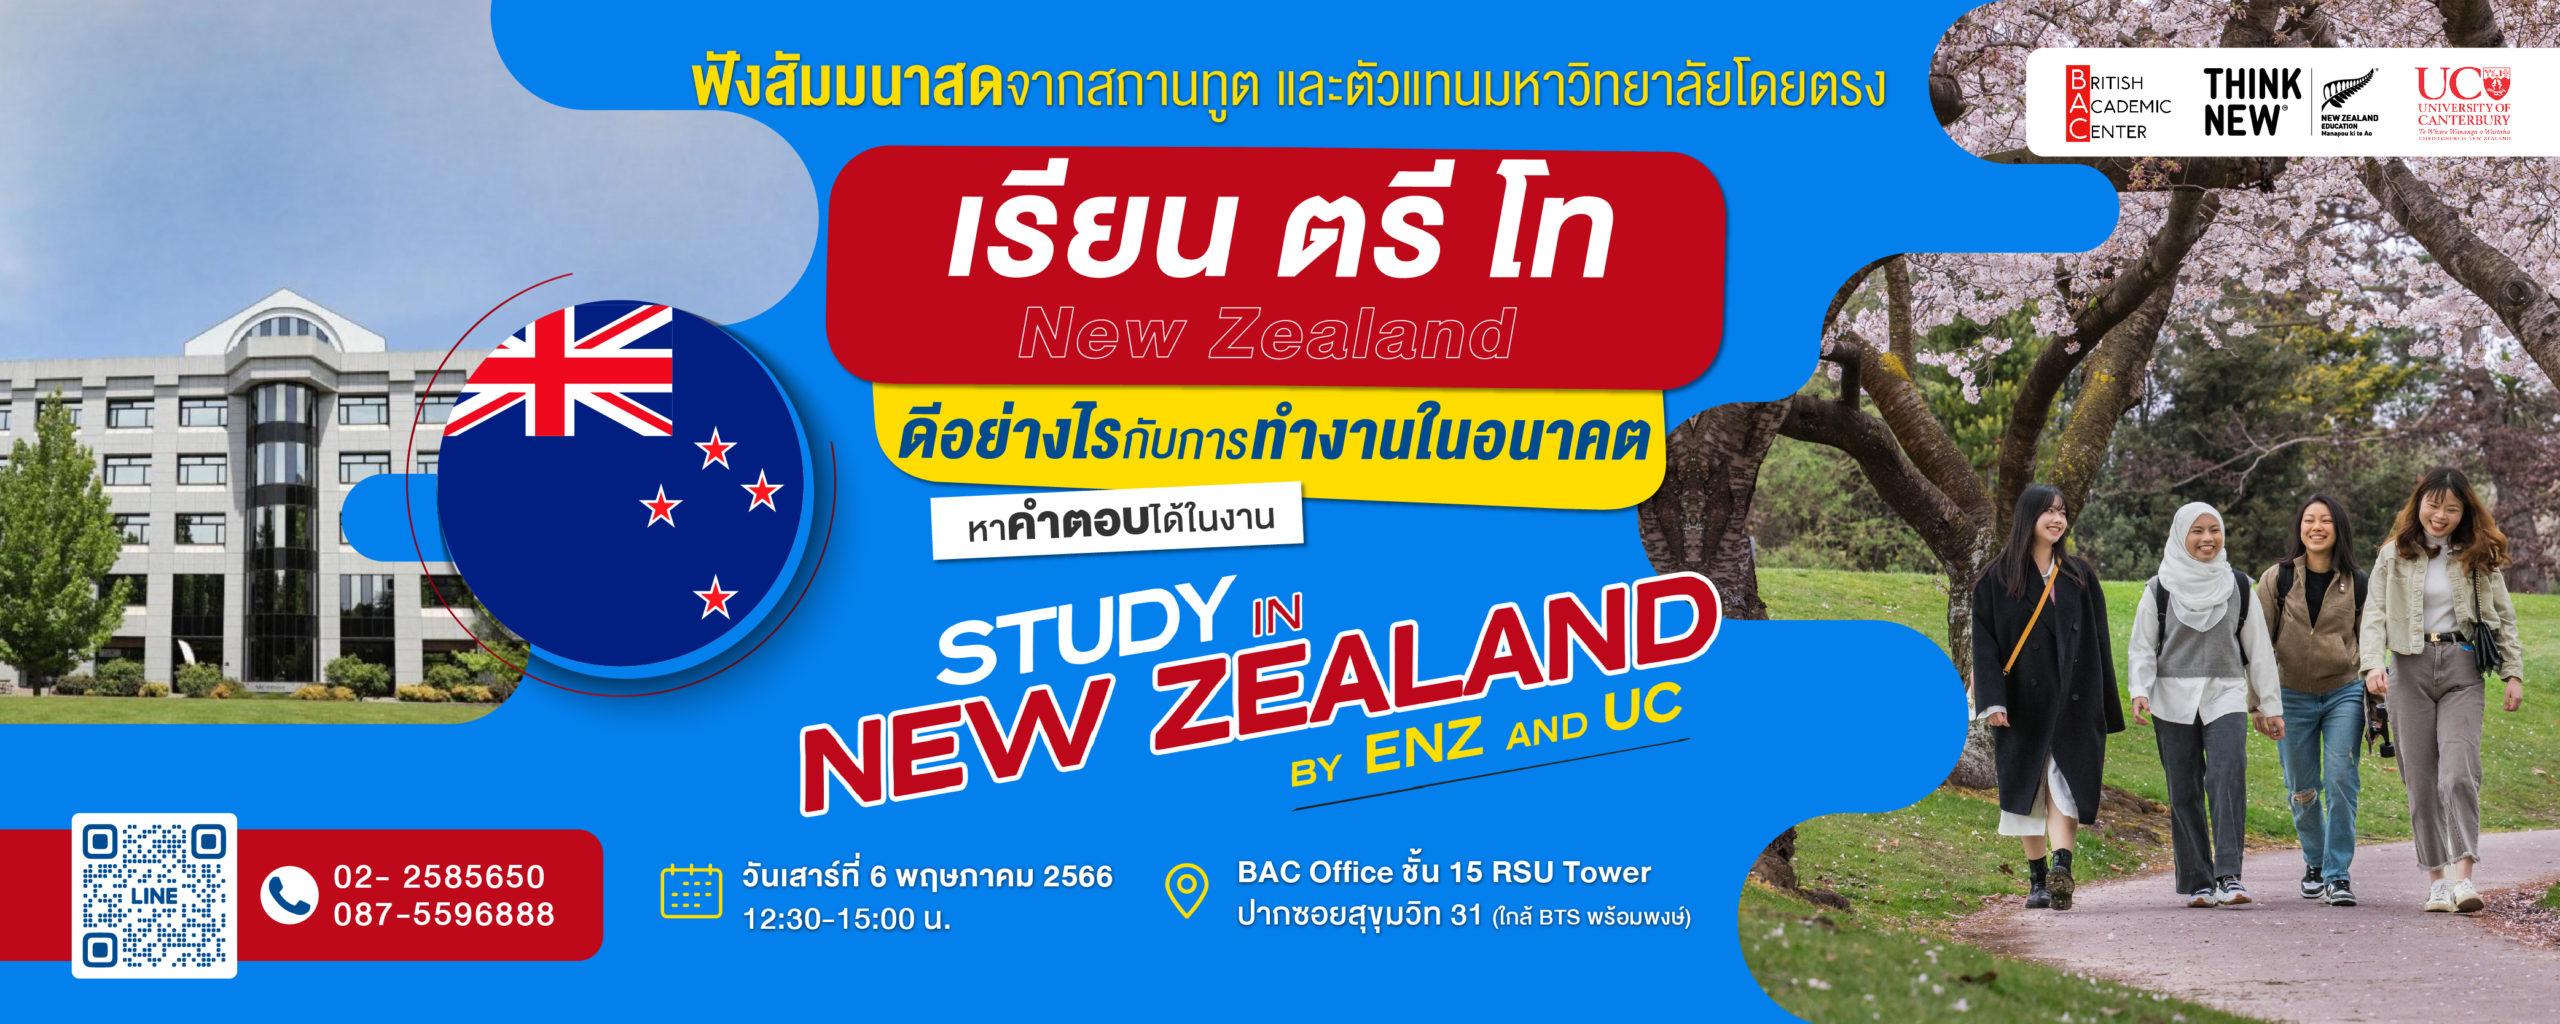 Study in New Zealand by New Zealand by Education New Zealand (ENZ) and University of Canterbury (UC)